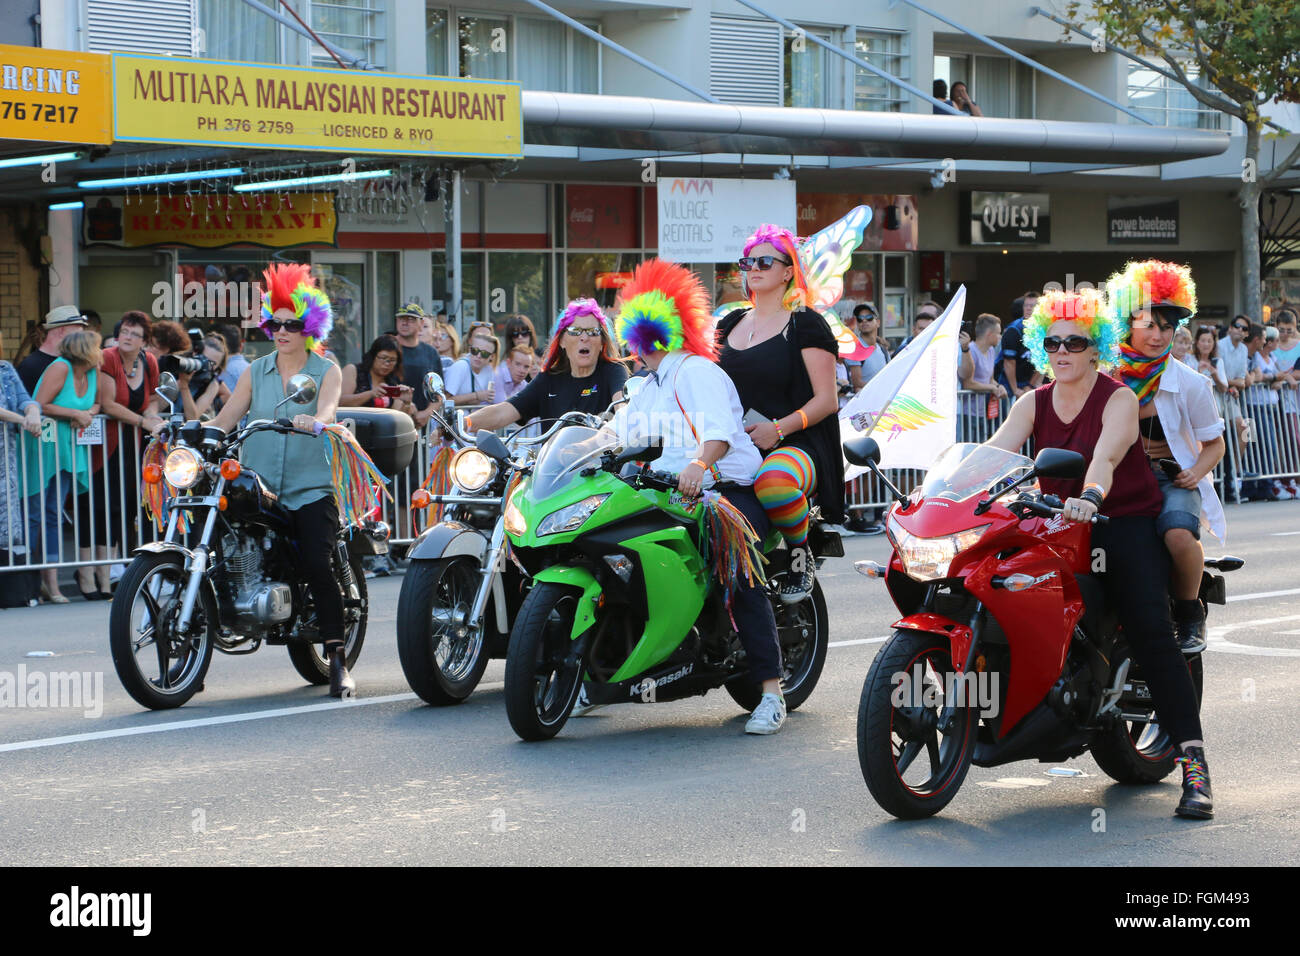 Auckland, New Zealand, 20th February, 2016. Members of Dykes on Bikes  gathering and watching the No Pride in Prisons Protesters. Credit: David  Evans Bailey/Alamy Live News Stock Photo - Alamy